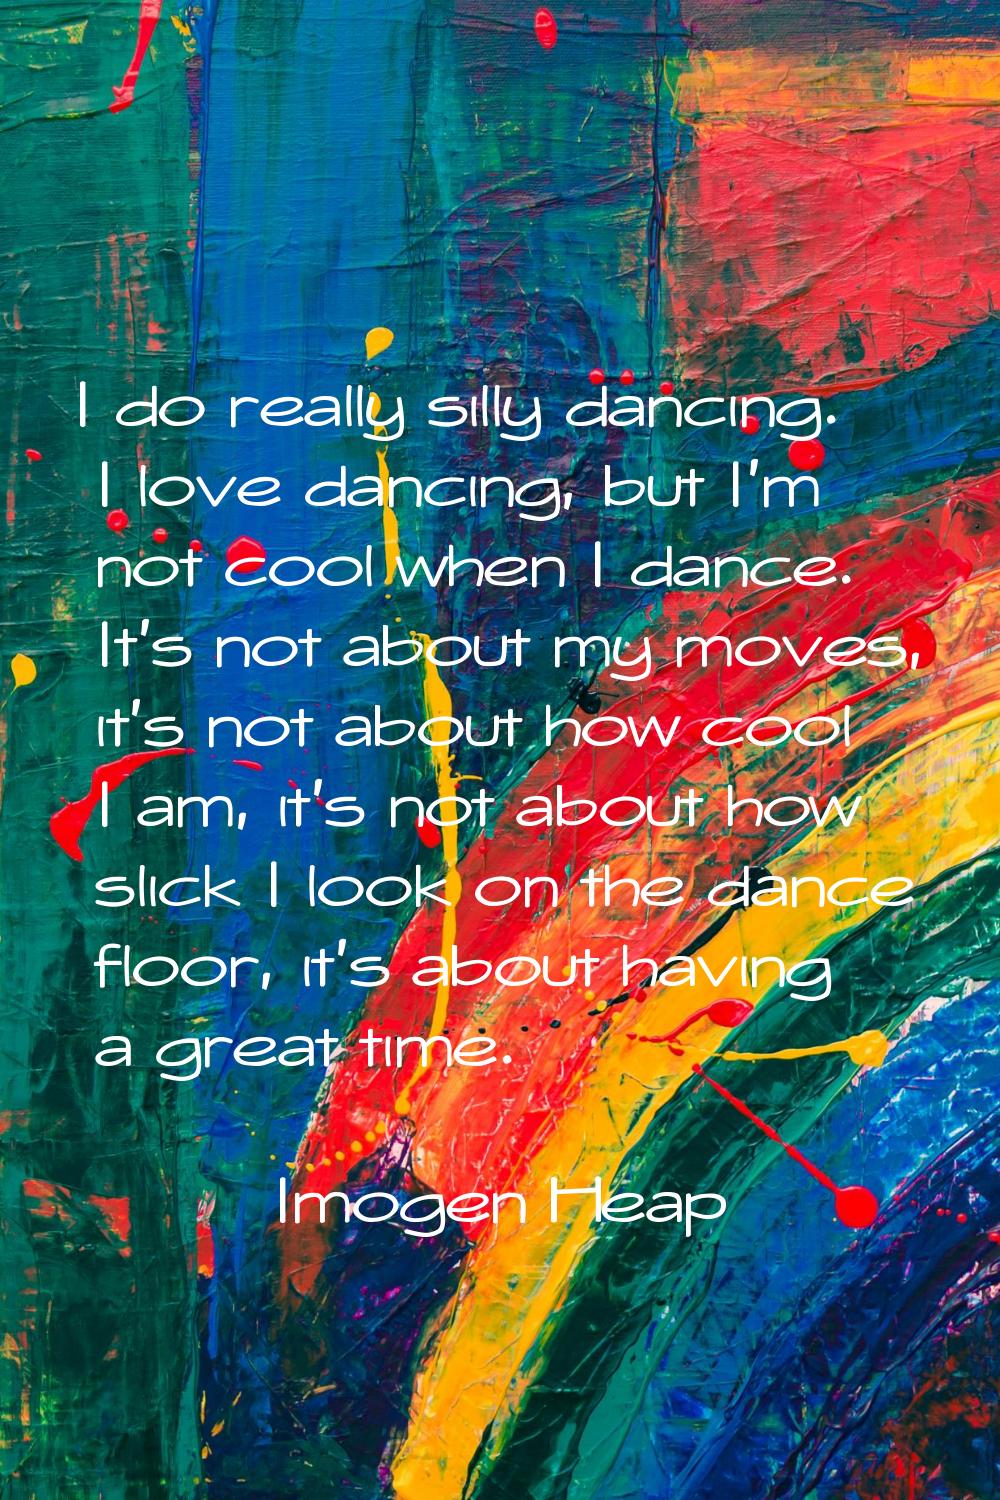 I do really silly dancing. I love dancing, but I'm not cool when I dance. It's not about my moves, 